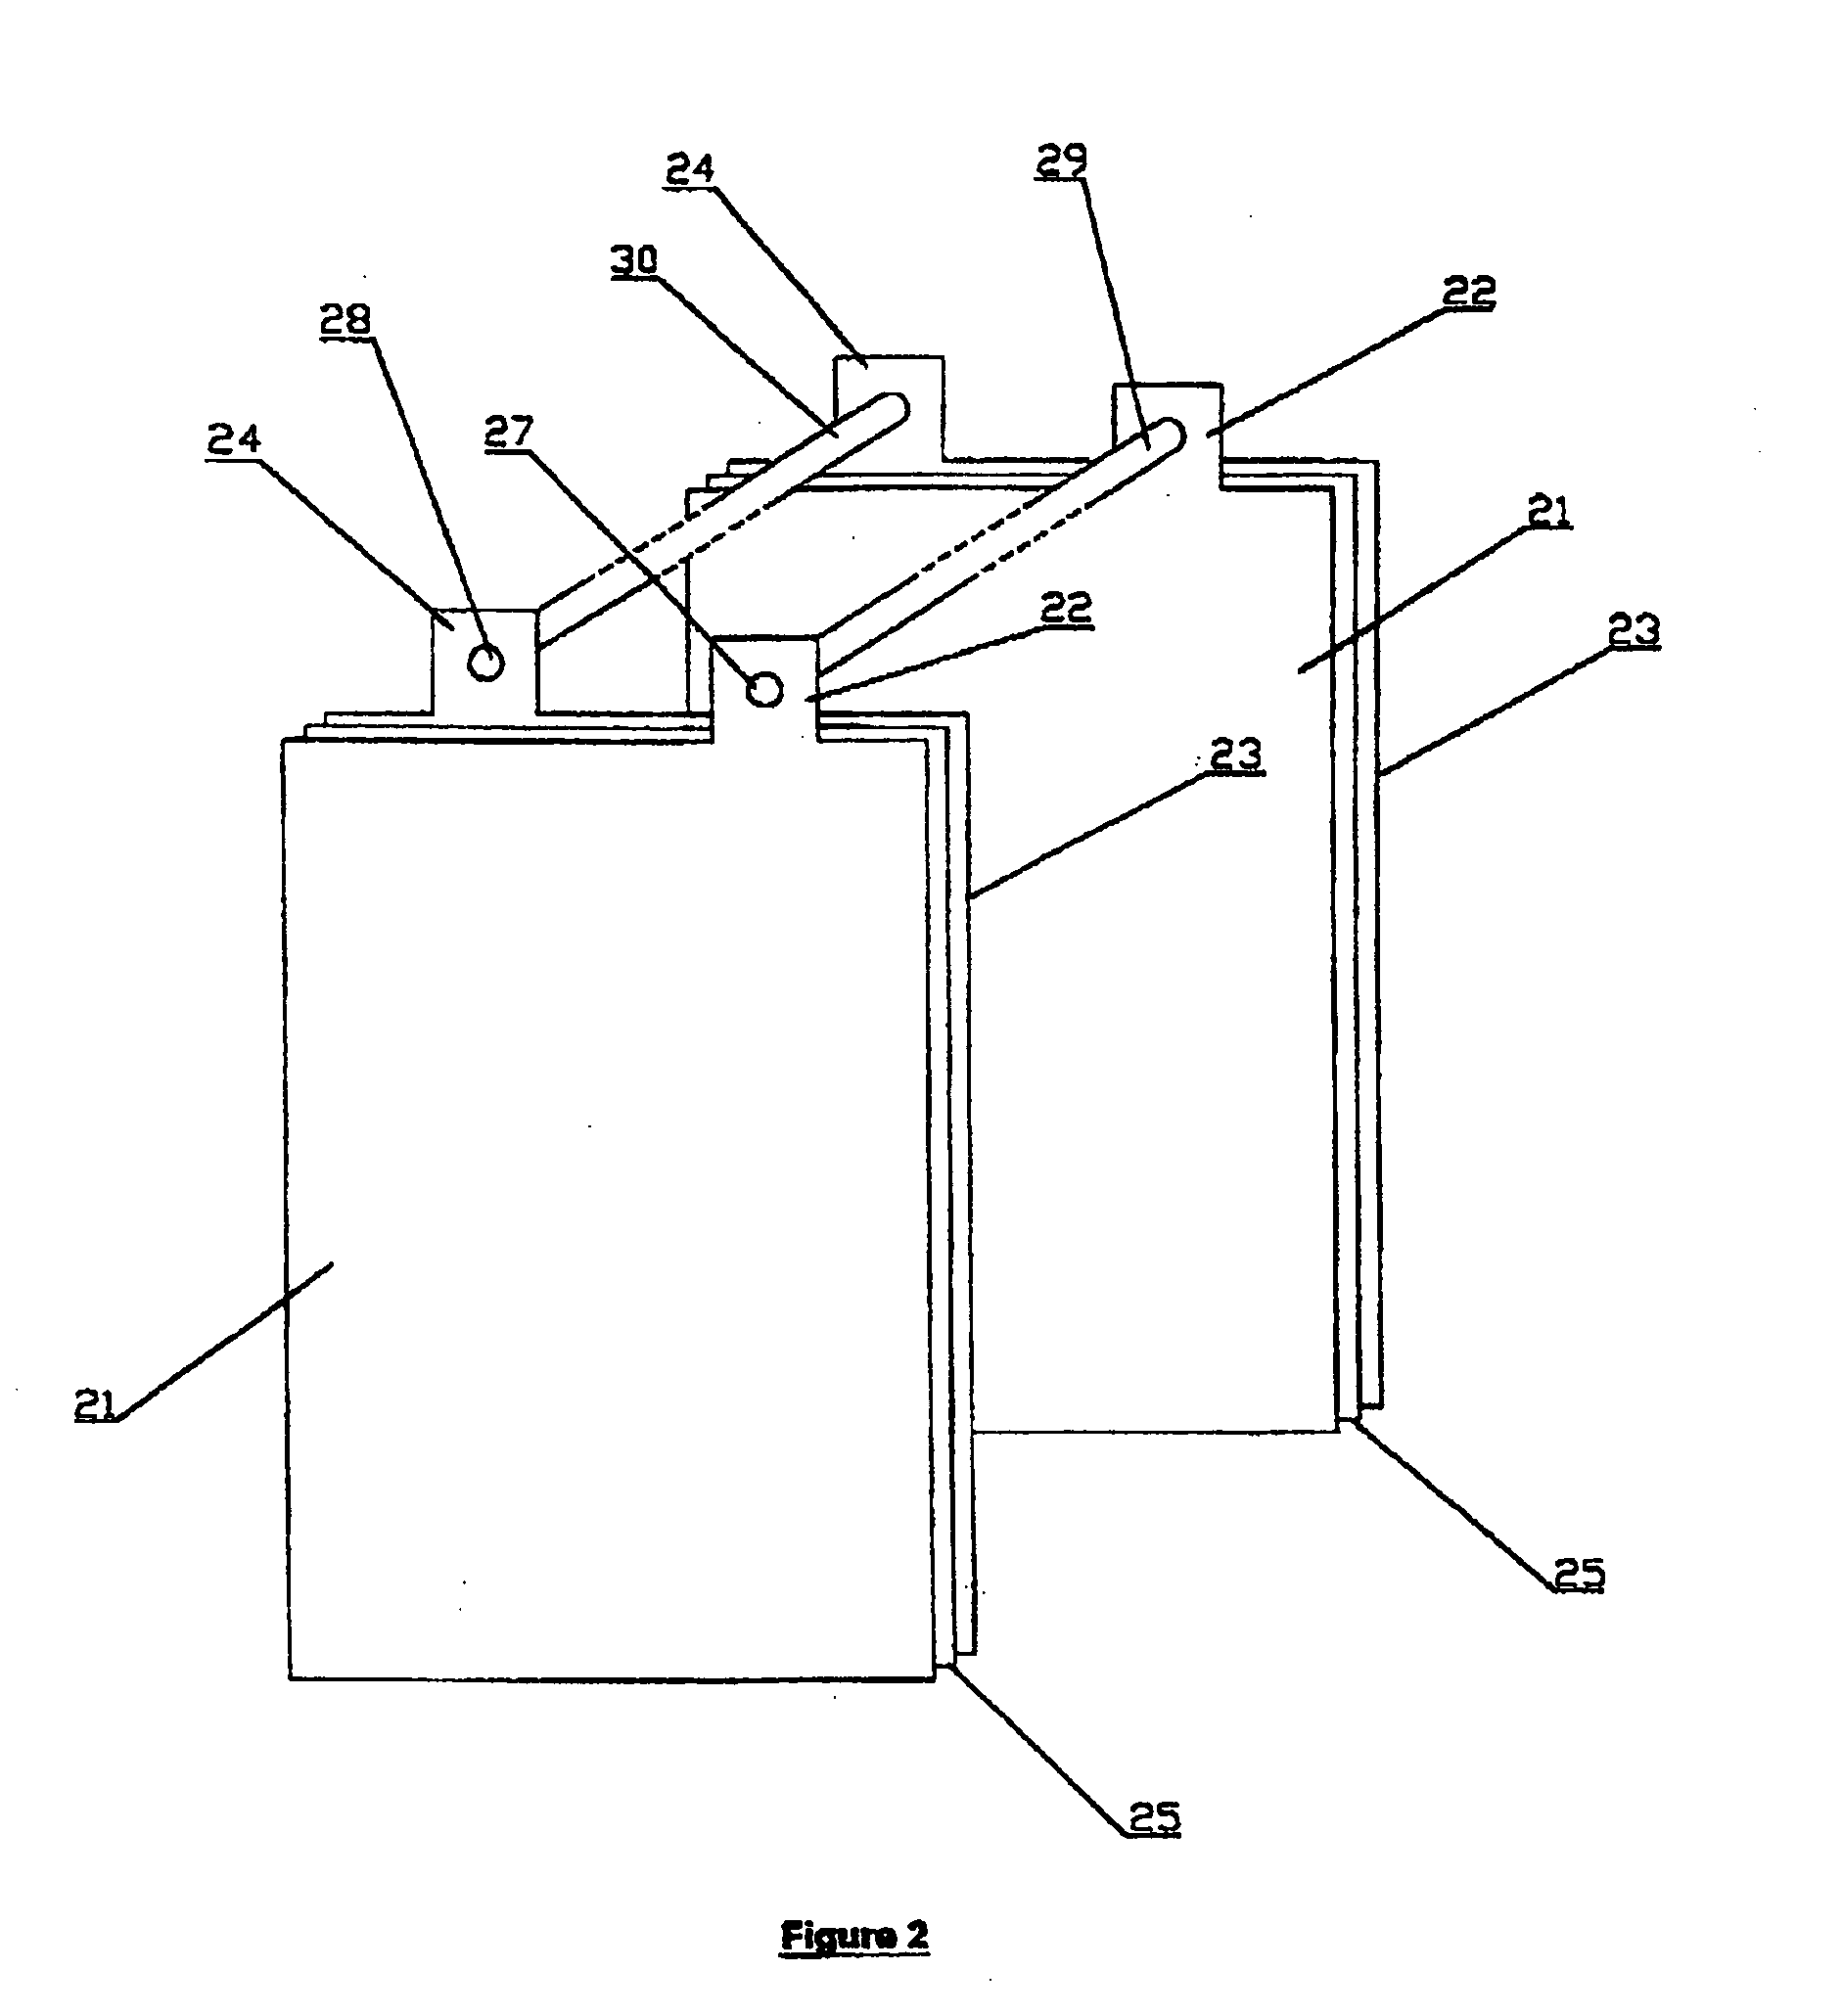 Charge Storage Device